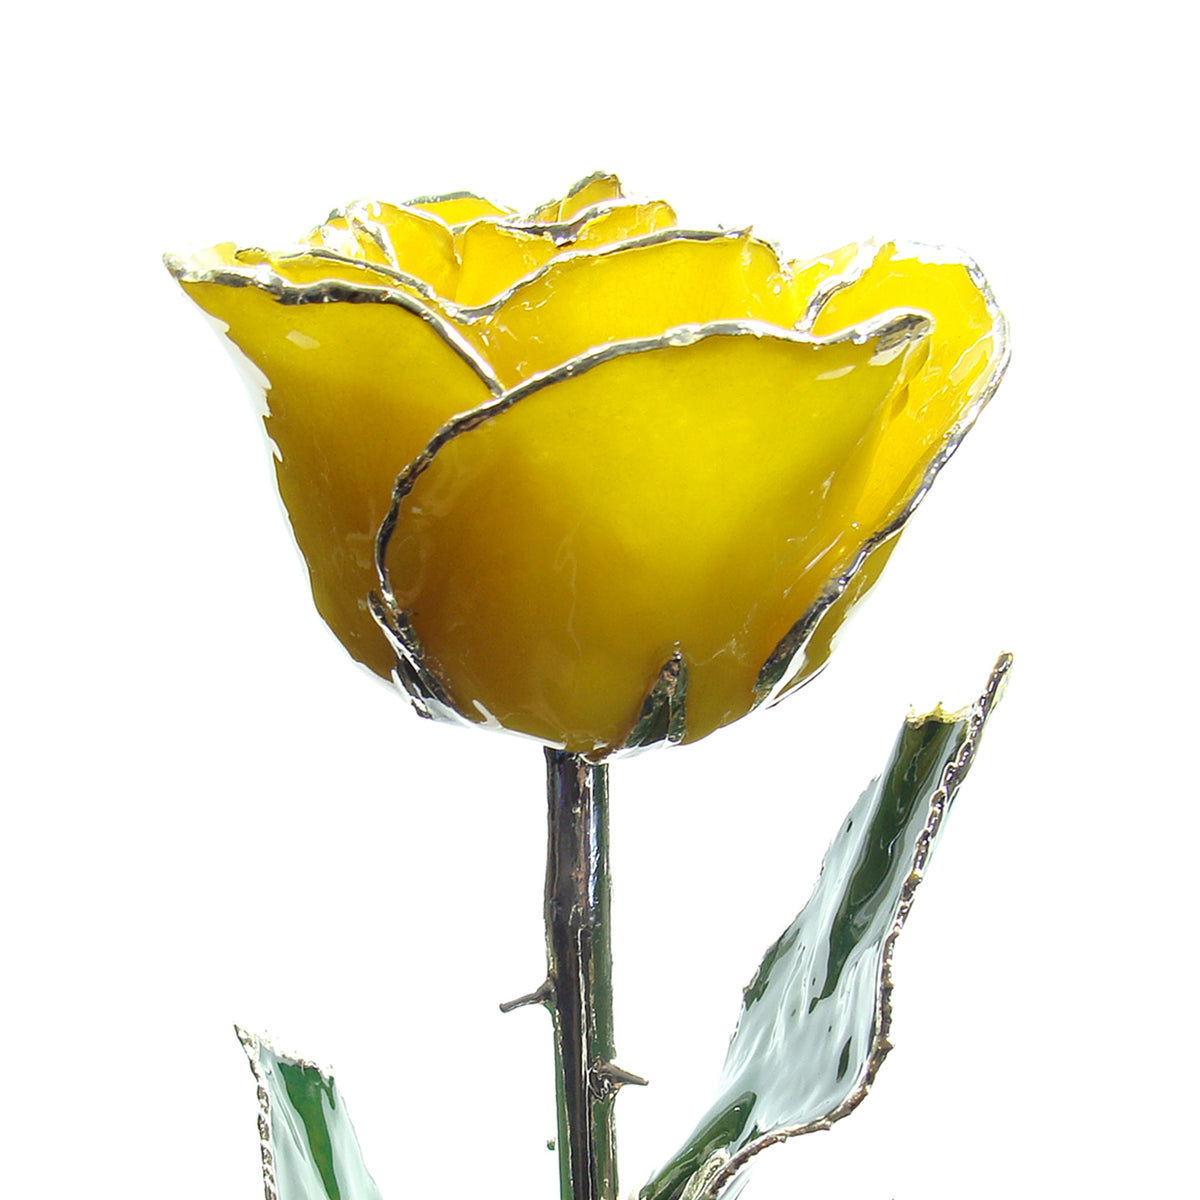 Silver Trimmed Forever Rose with Yellow Petals. View of Stem, Leaves, and Rose Petals and Showing Detail of Silver Trim